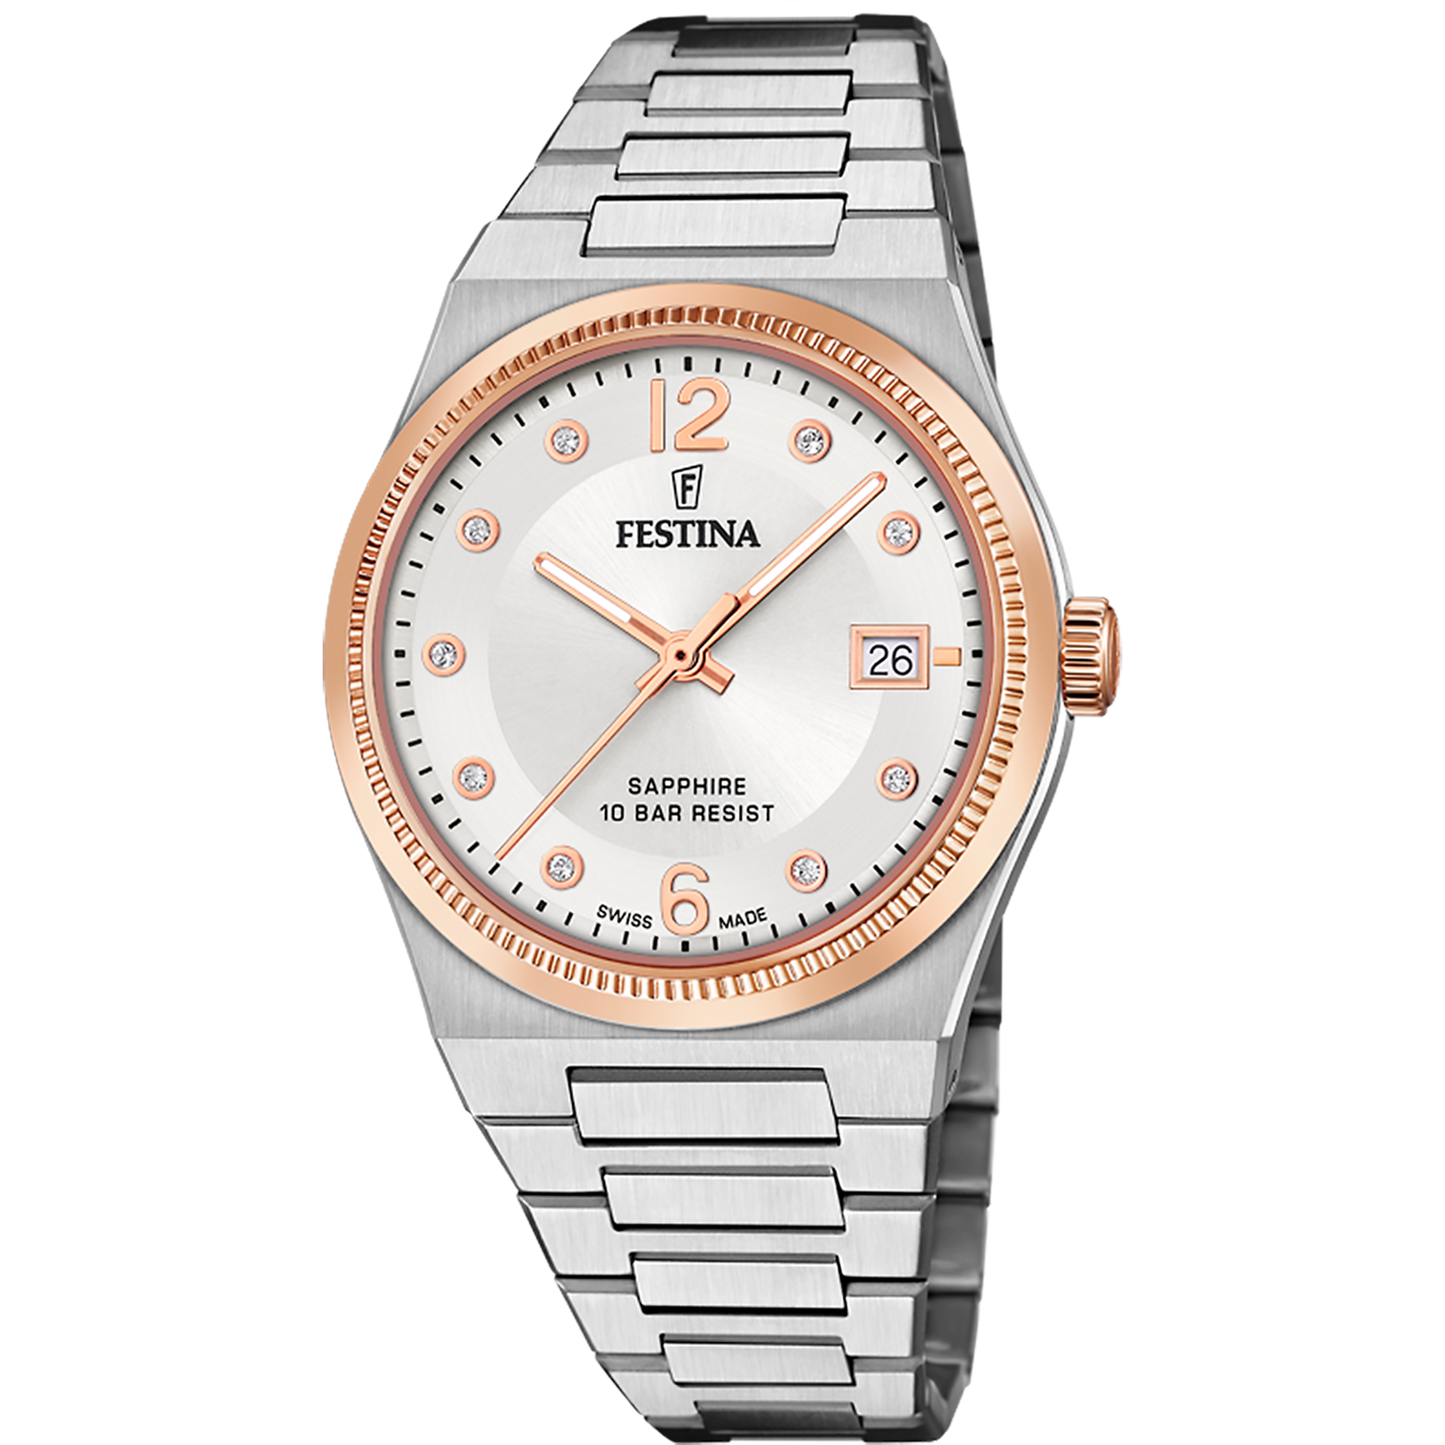 Festina Swiss Made F20037-1 - Analog - Strap Material Stainless Steel I Festina Watches USA